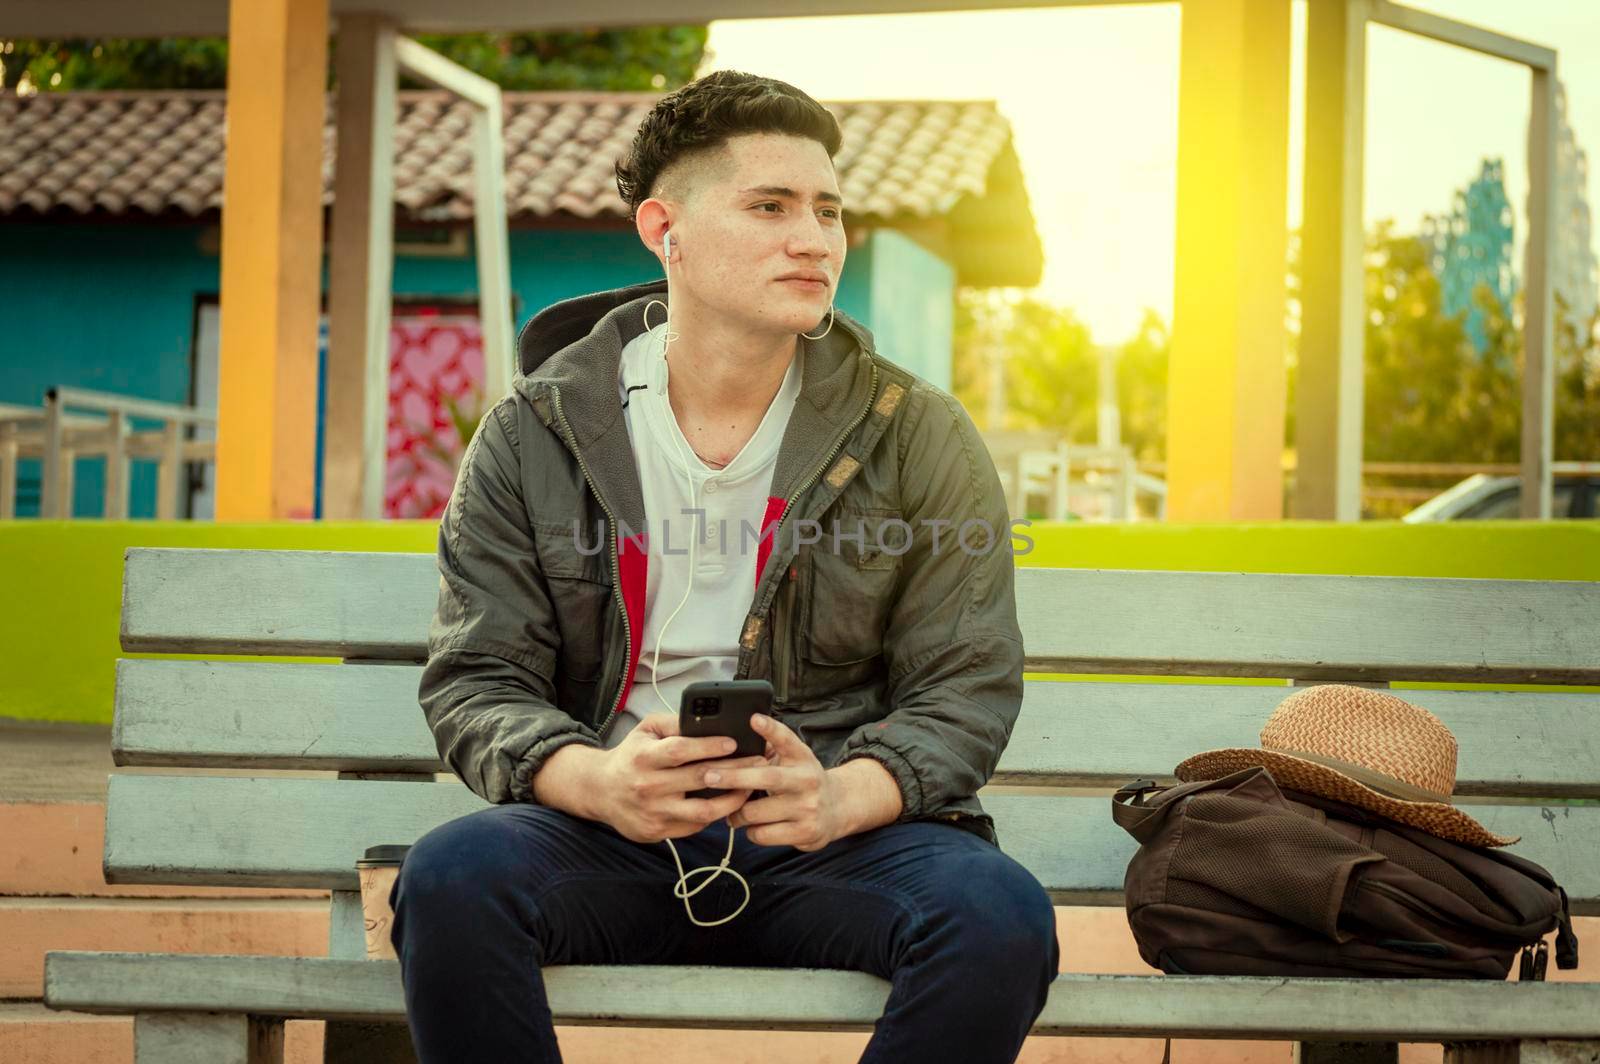 An attractive guy listening to music on a bench, Latin man sitting on a bench listening to music with his phone by isaiphoto